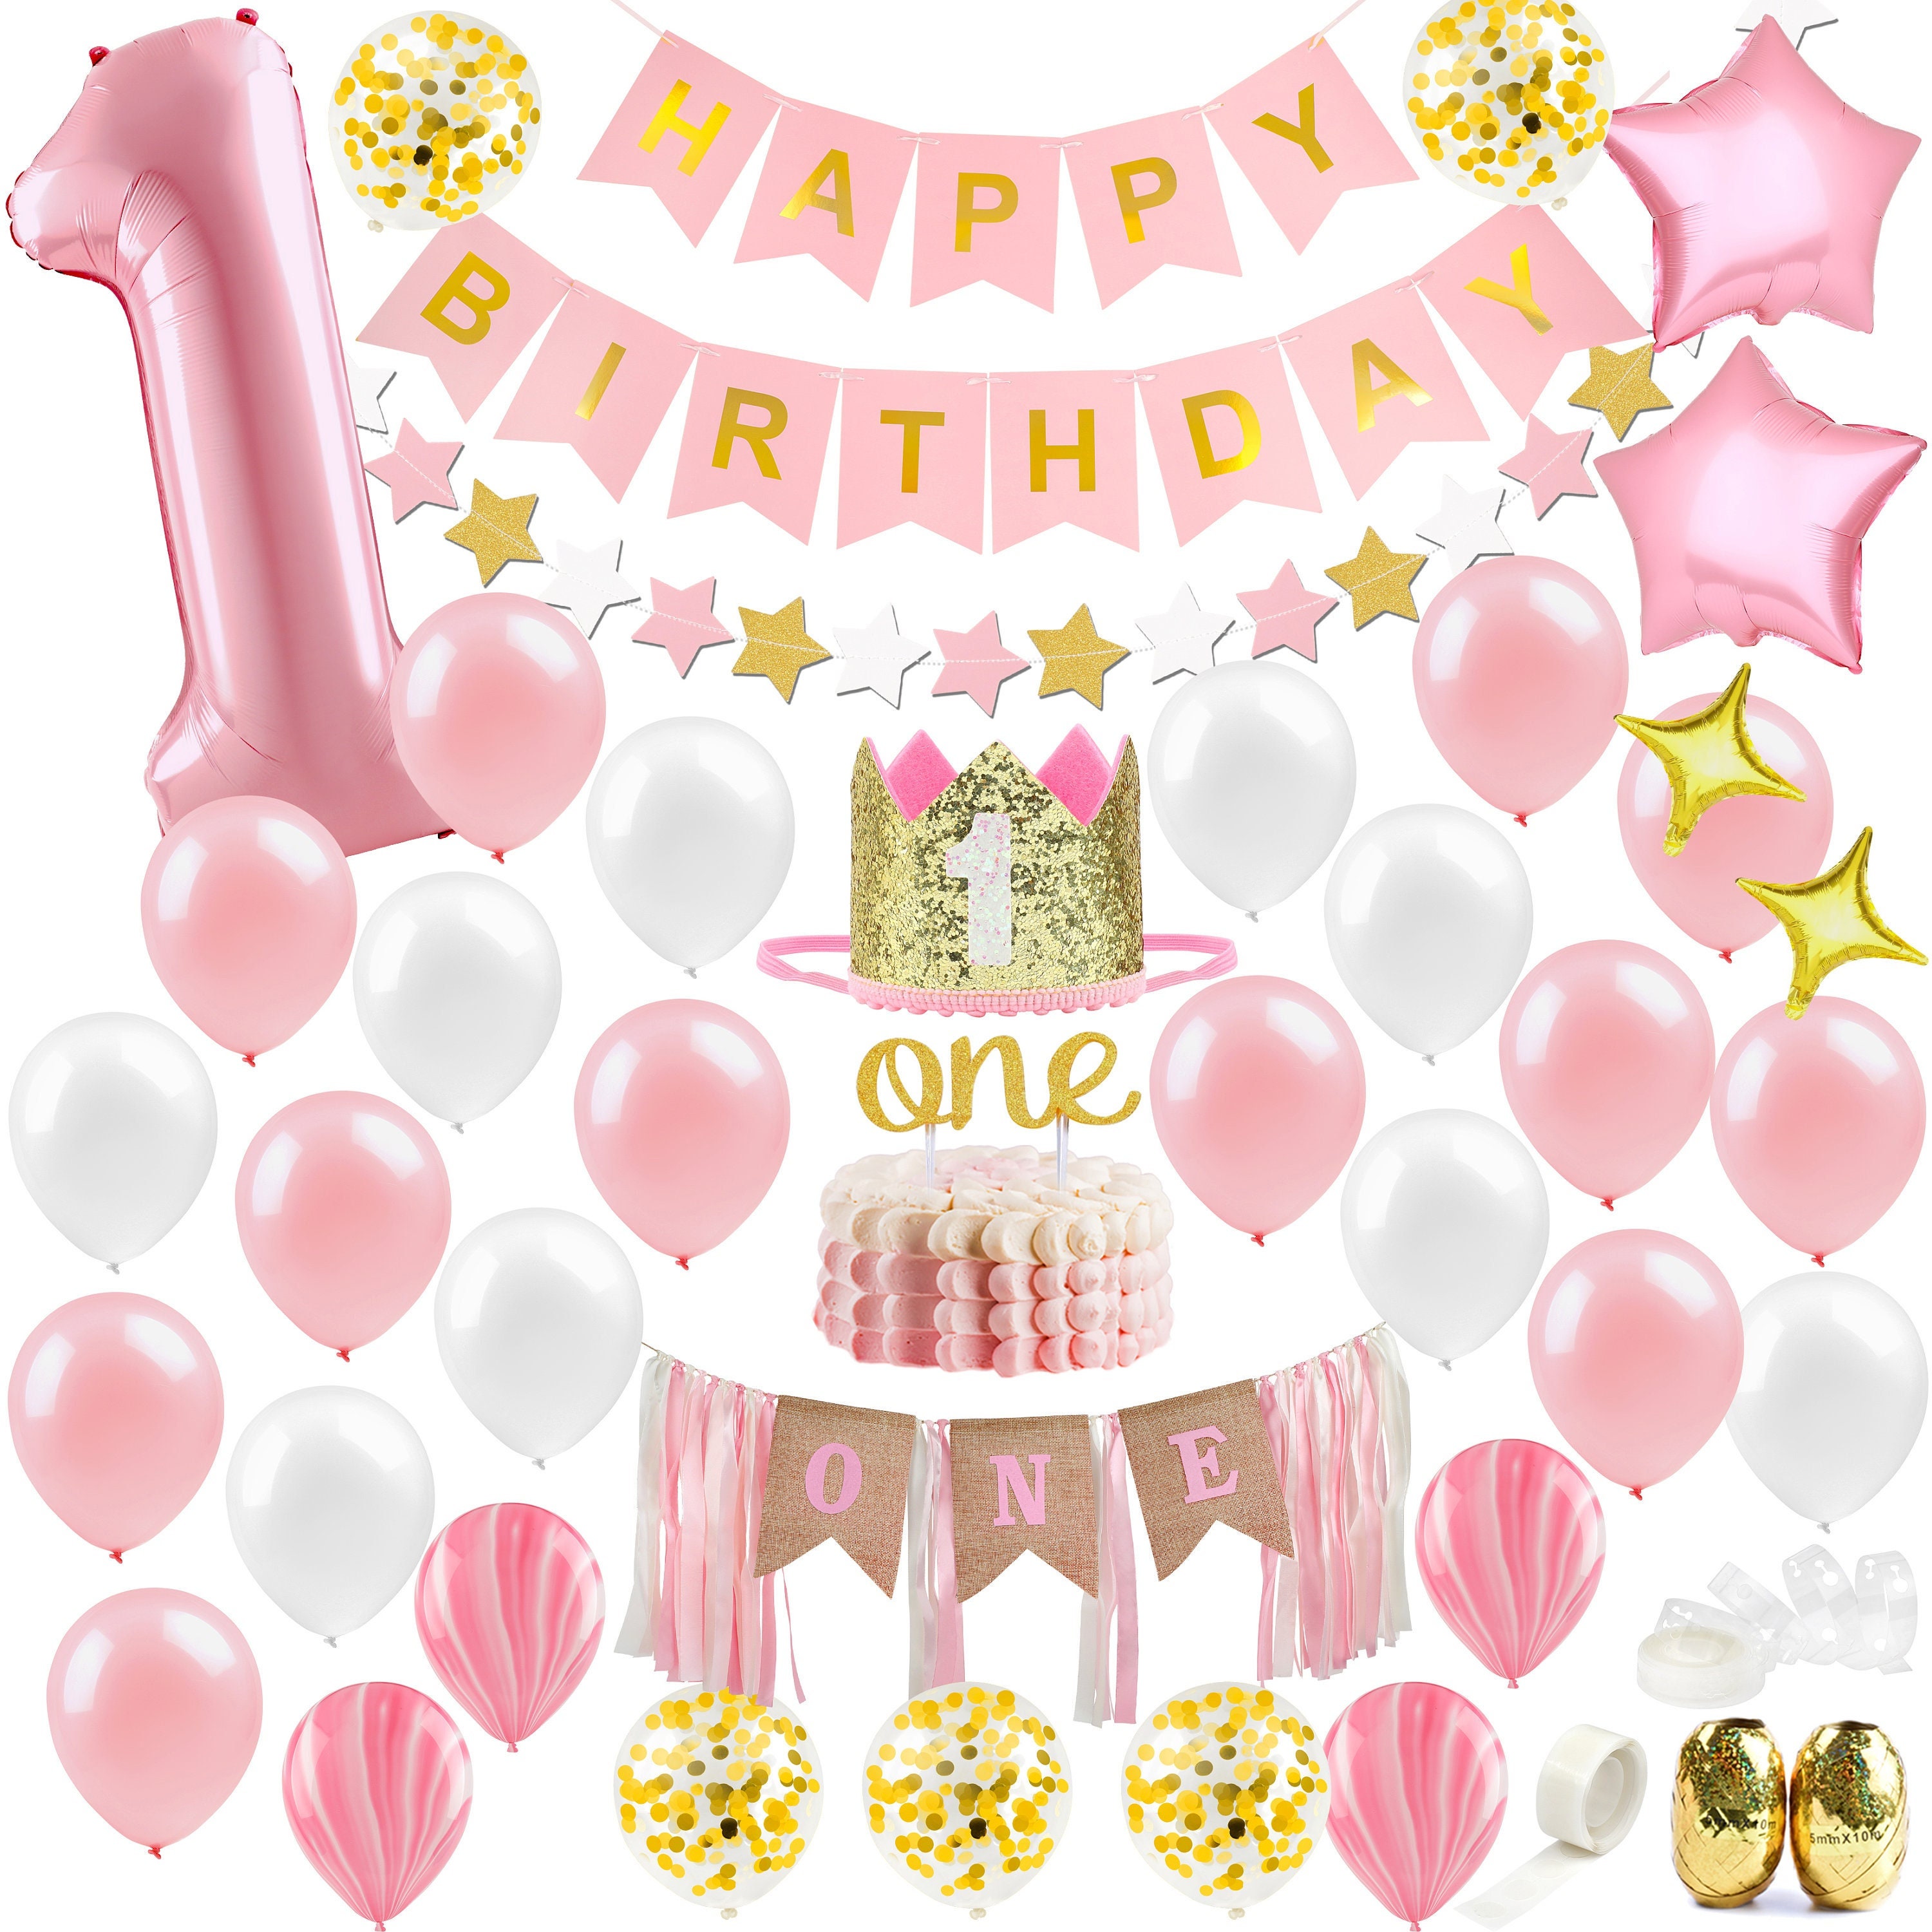 First Birthday Balloon 'ONE' Boxes for Baby Girl WITH 24 Balloons - Baby  1st Birthday Girl Decoration Clear Cube Blocks 'ONE' Letters as Cake Smash